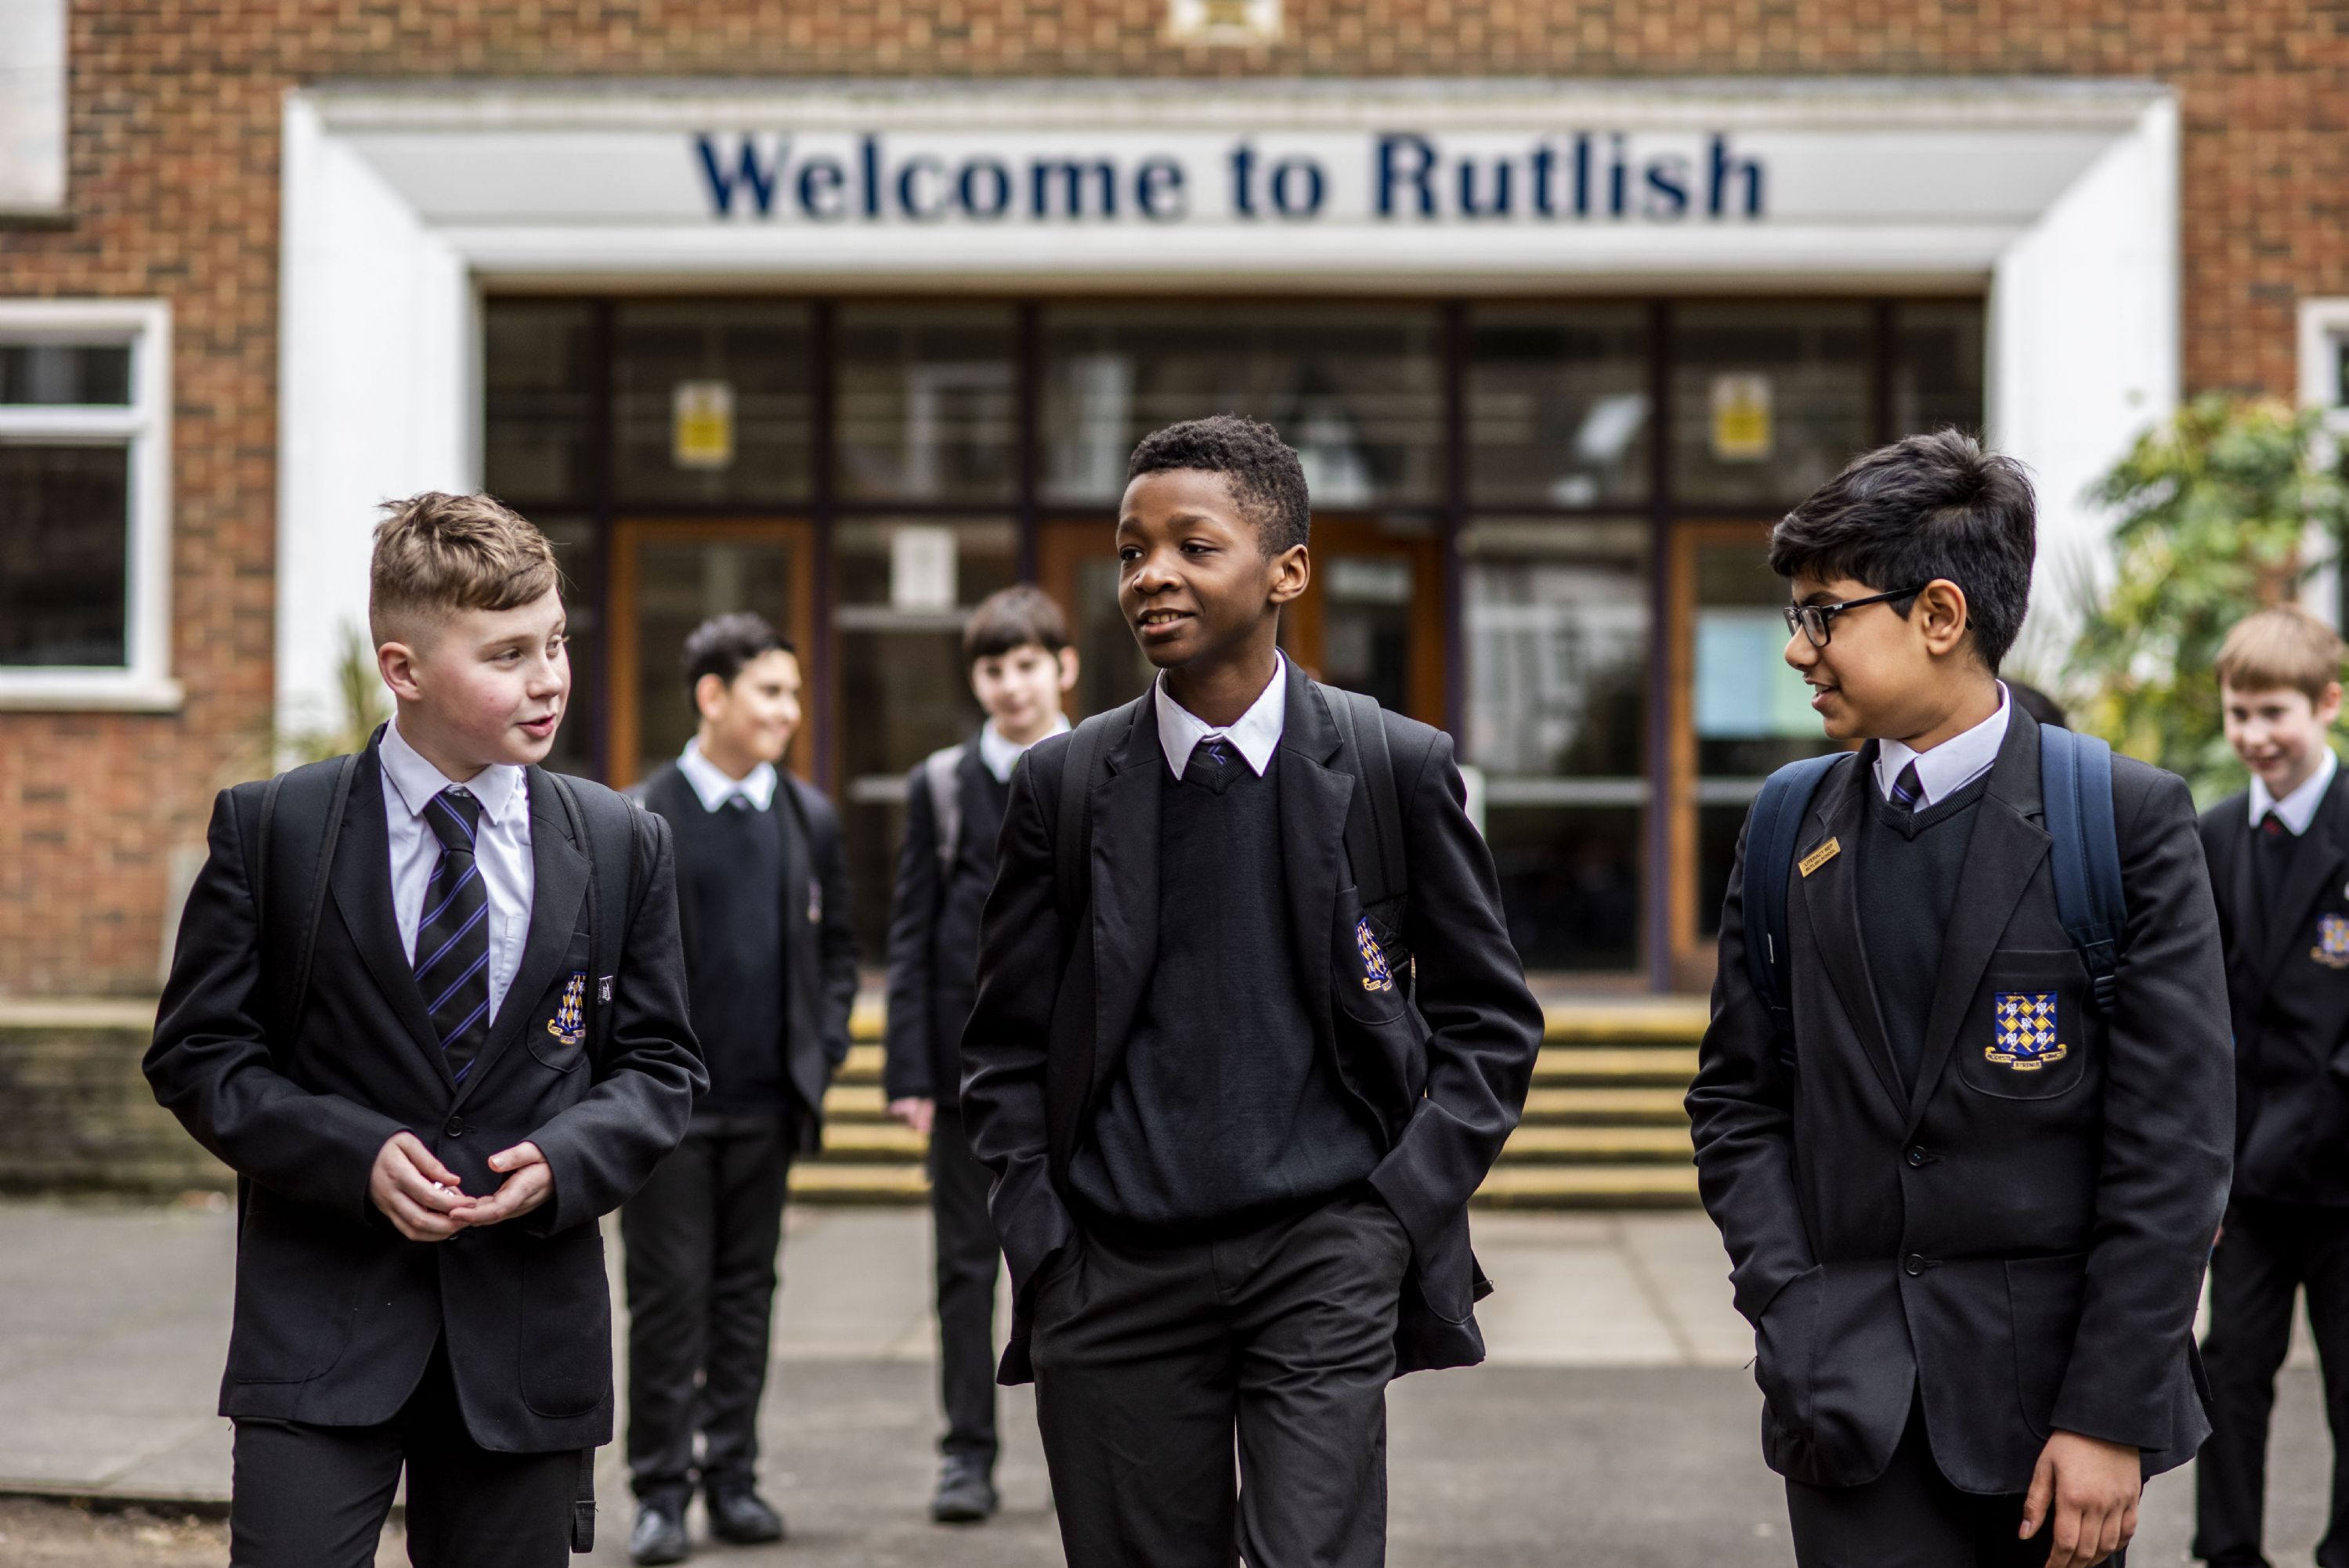 students near the "Welcome to Rutlish" sign